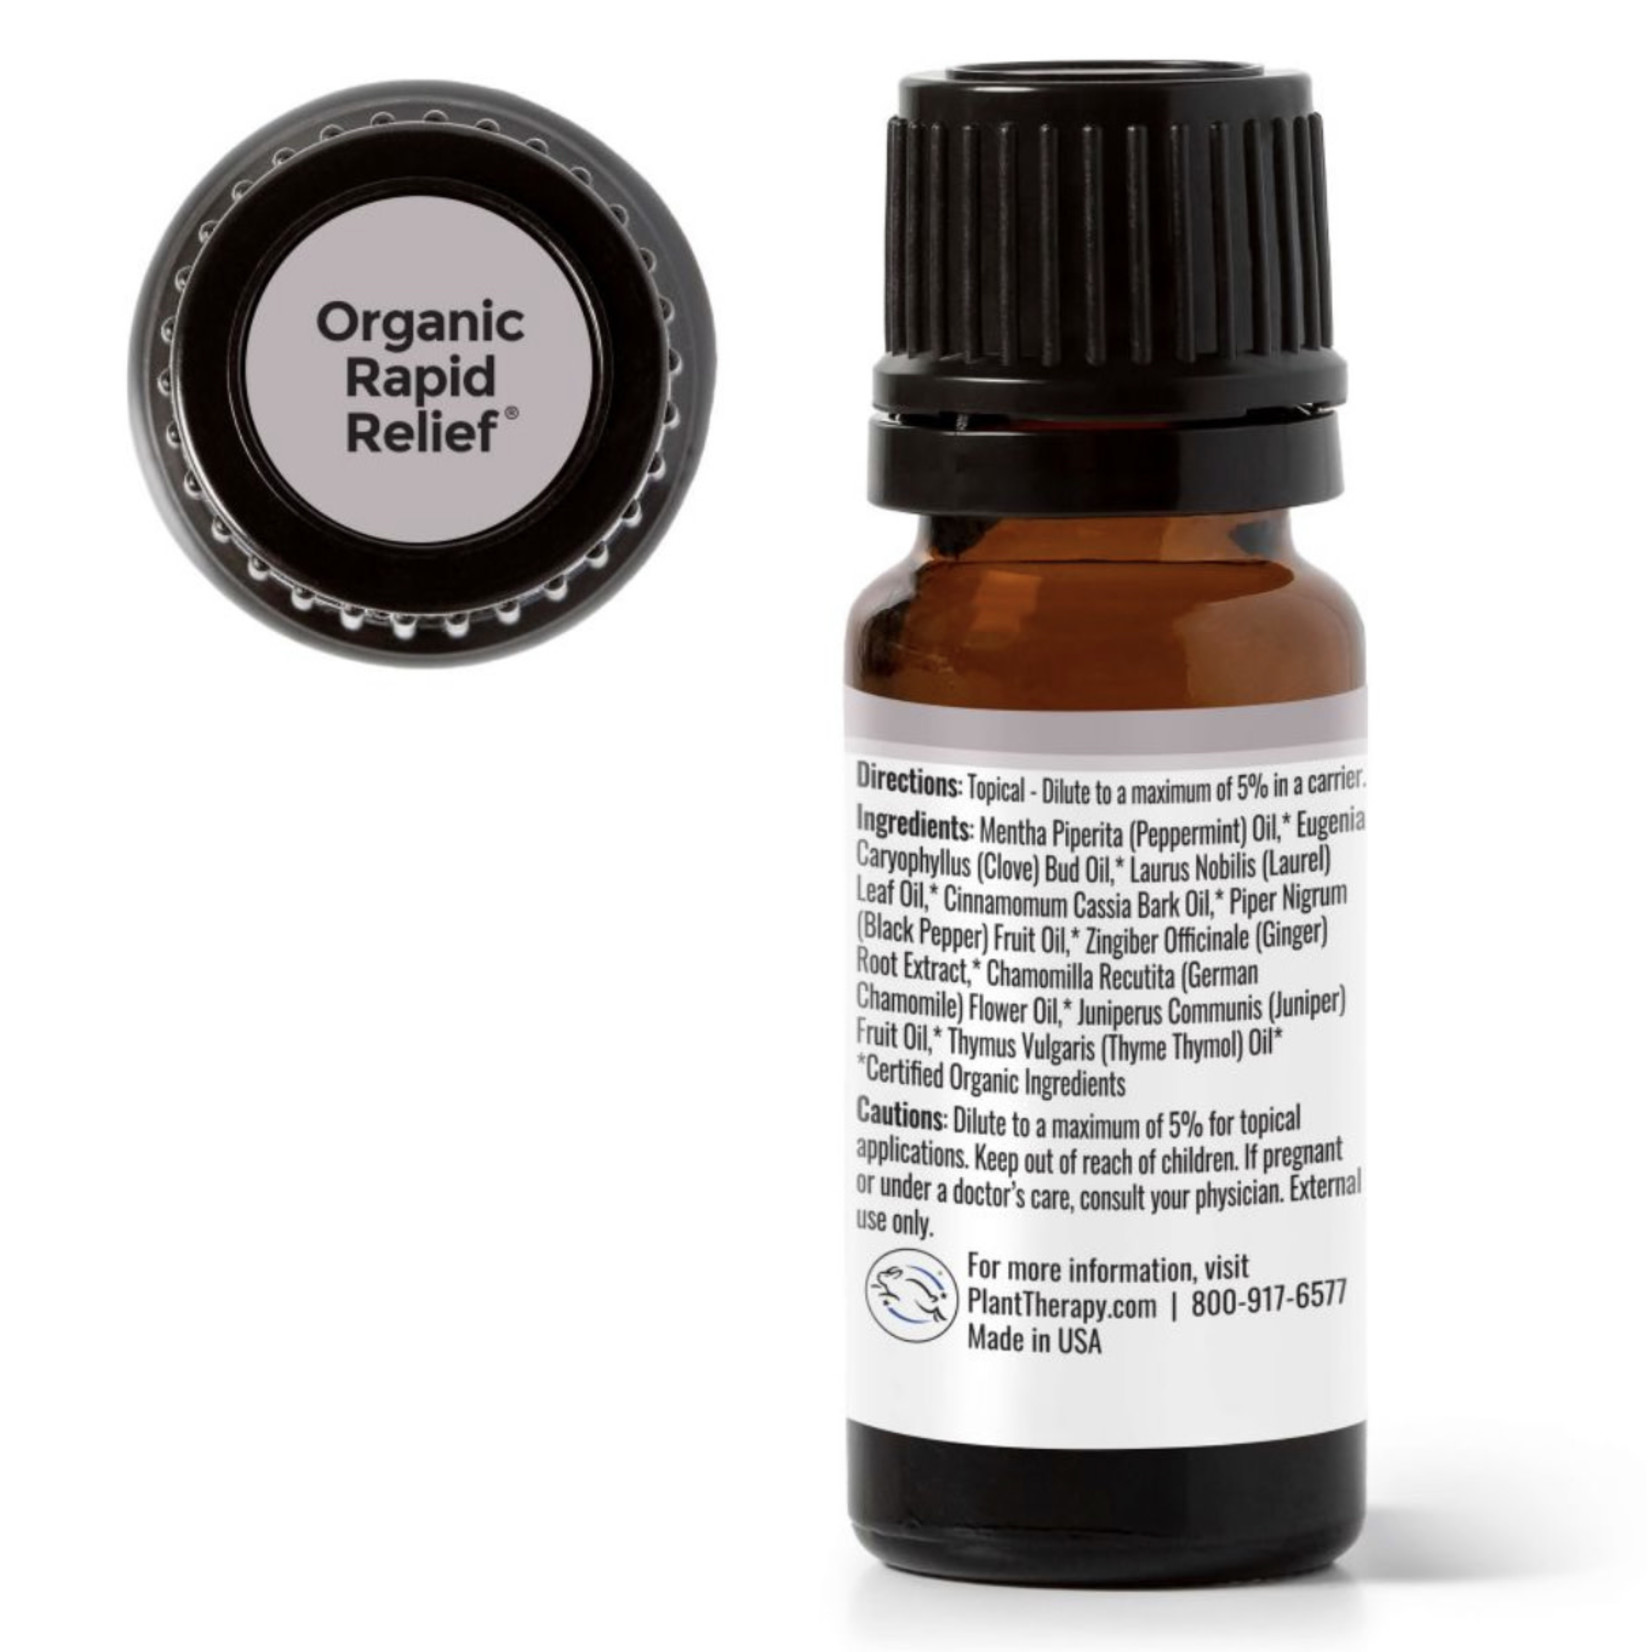 Plant Therapy Organic Rapid Relief Essential Oil Blend